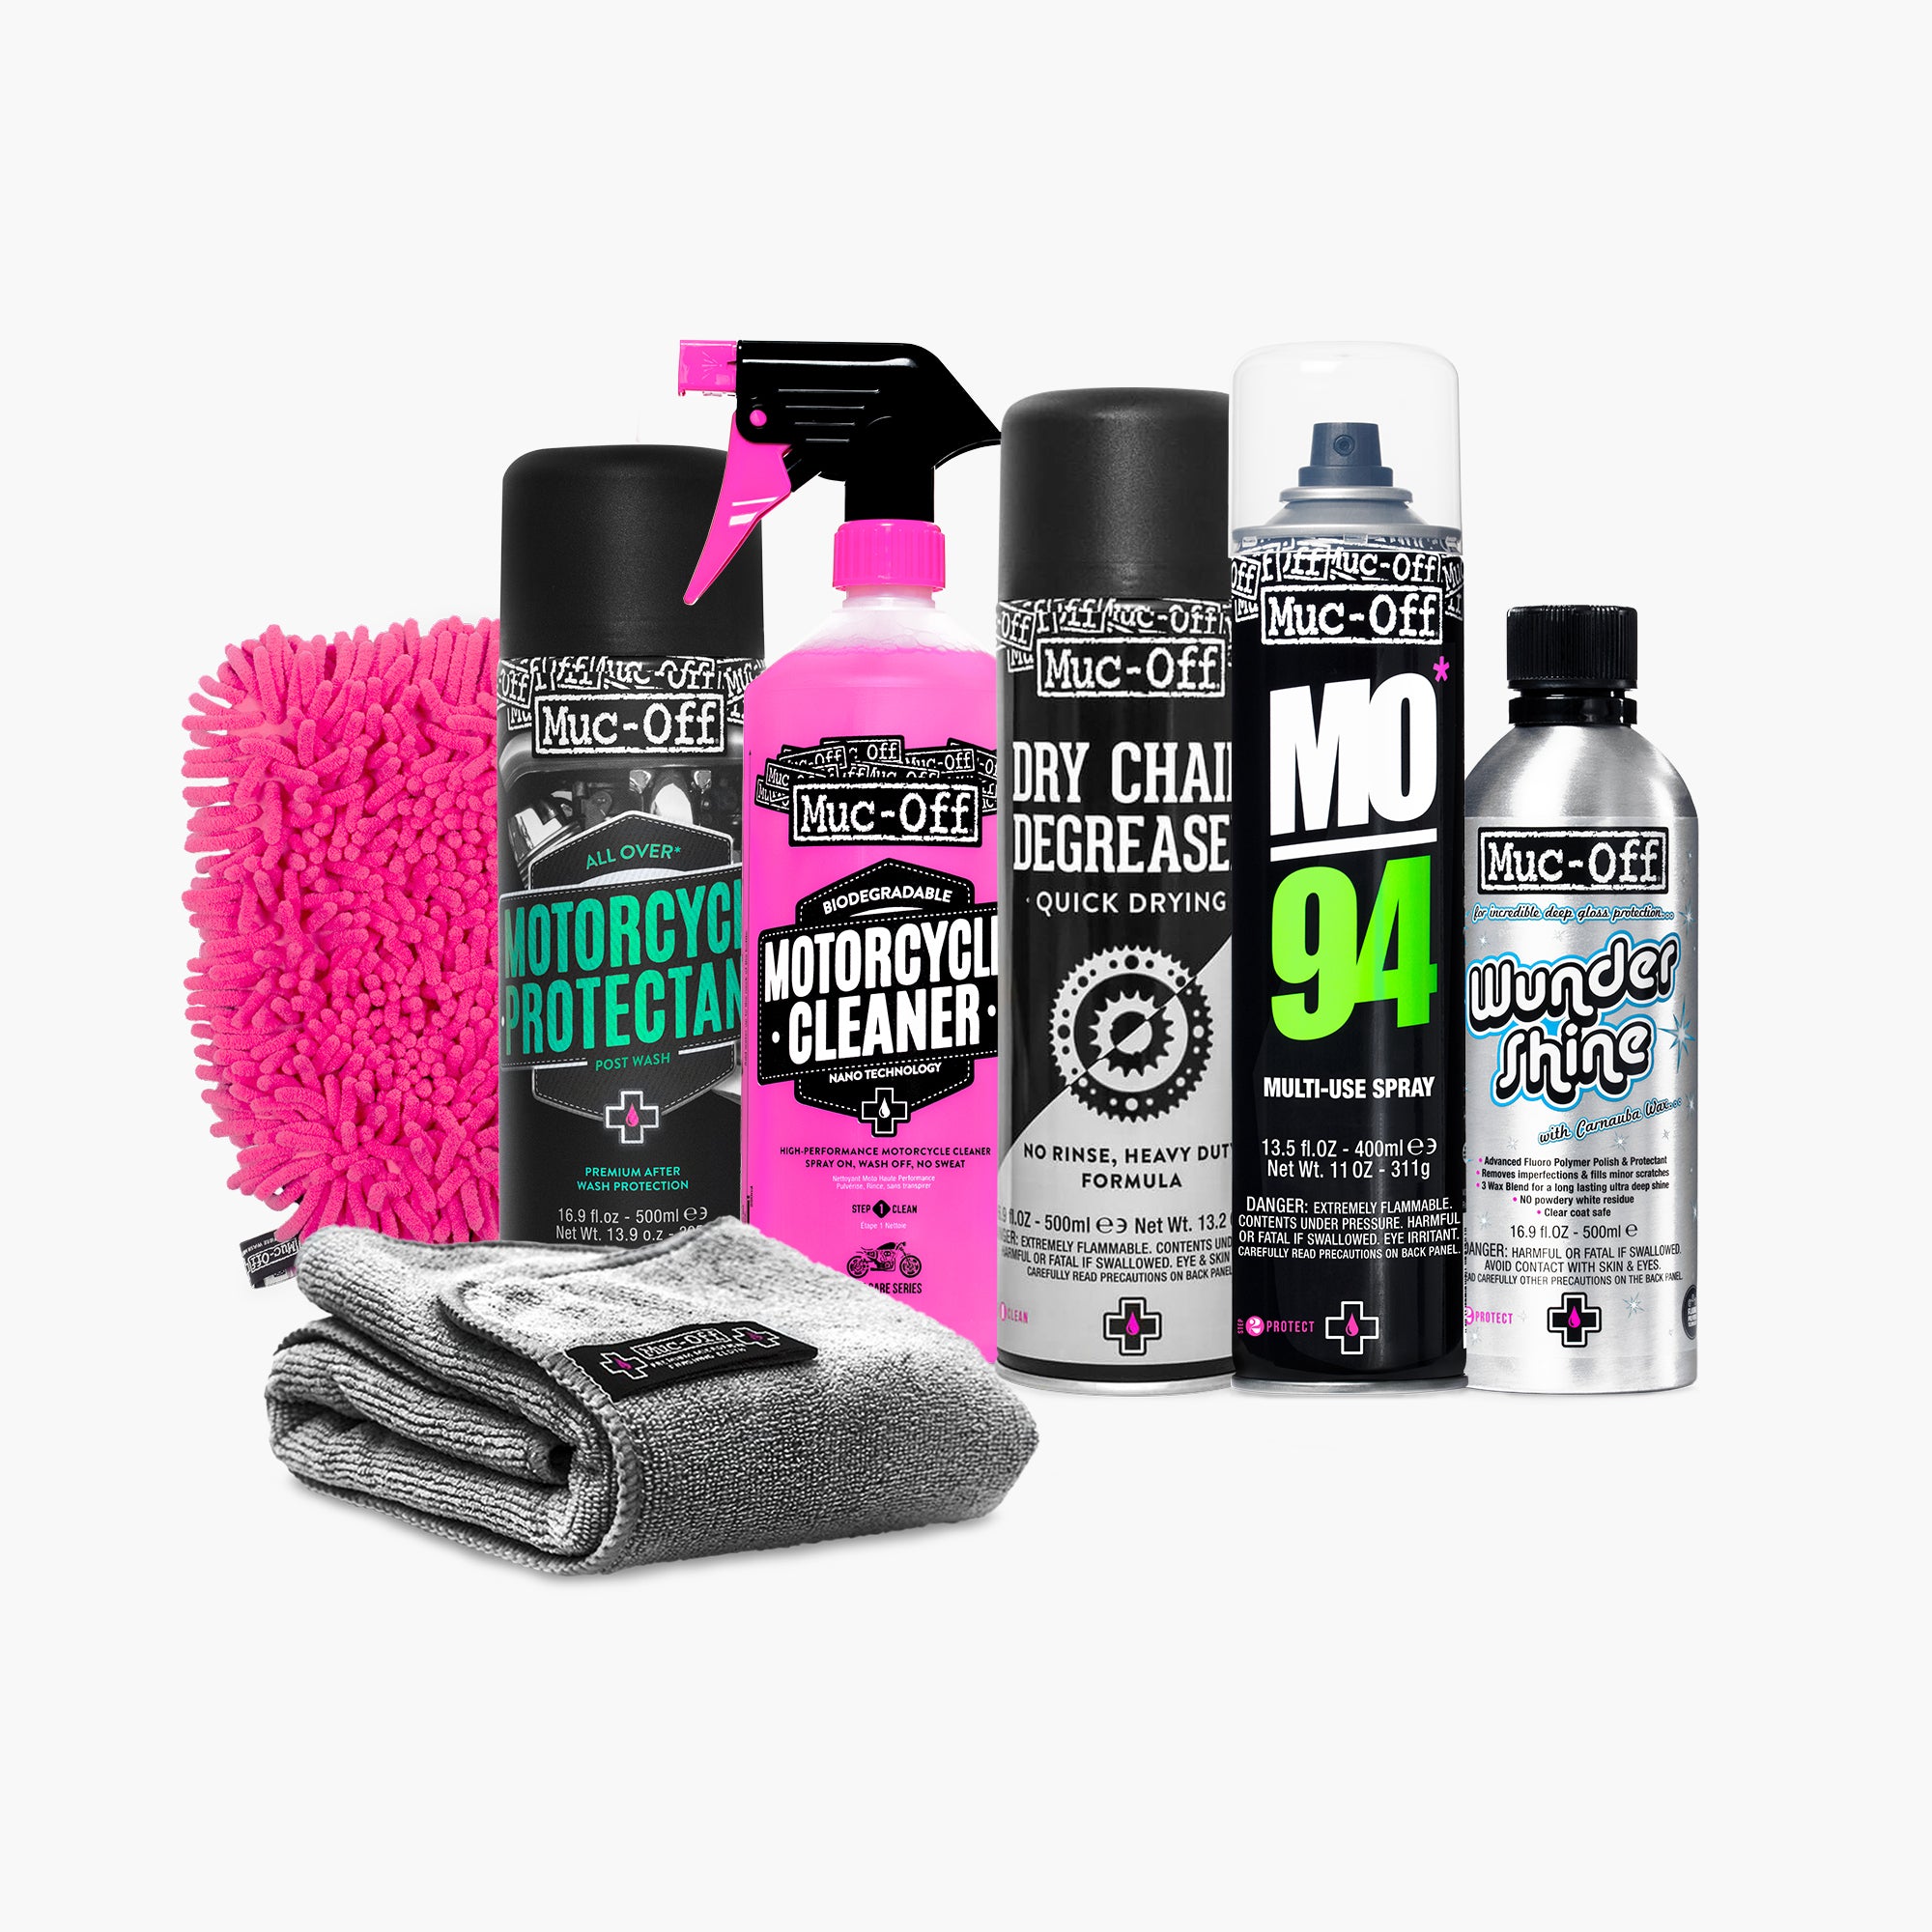 Muc-Off Products Help Clean, Protect Powersports Vehicles - Motorcycle &  Powersports News